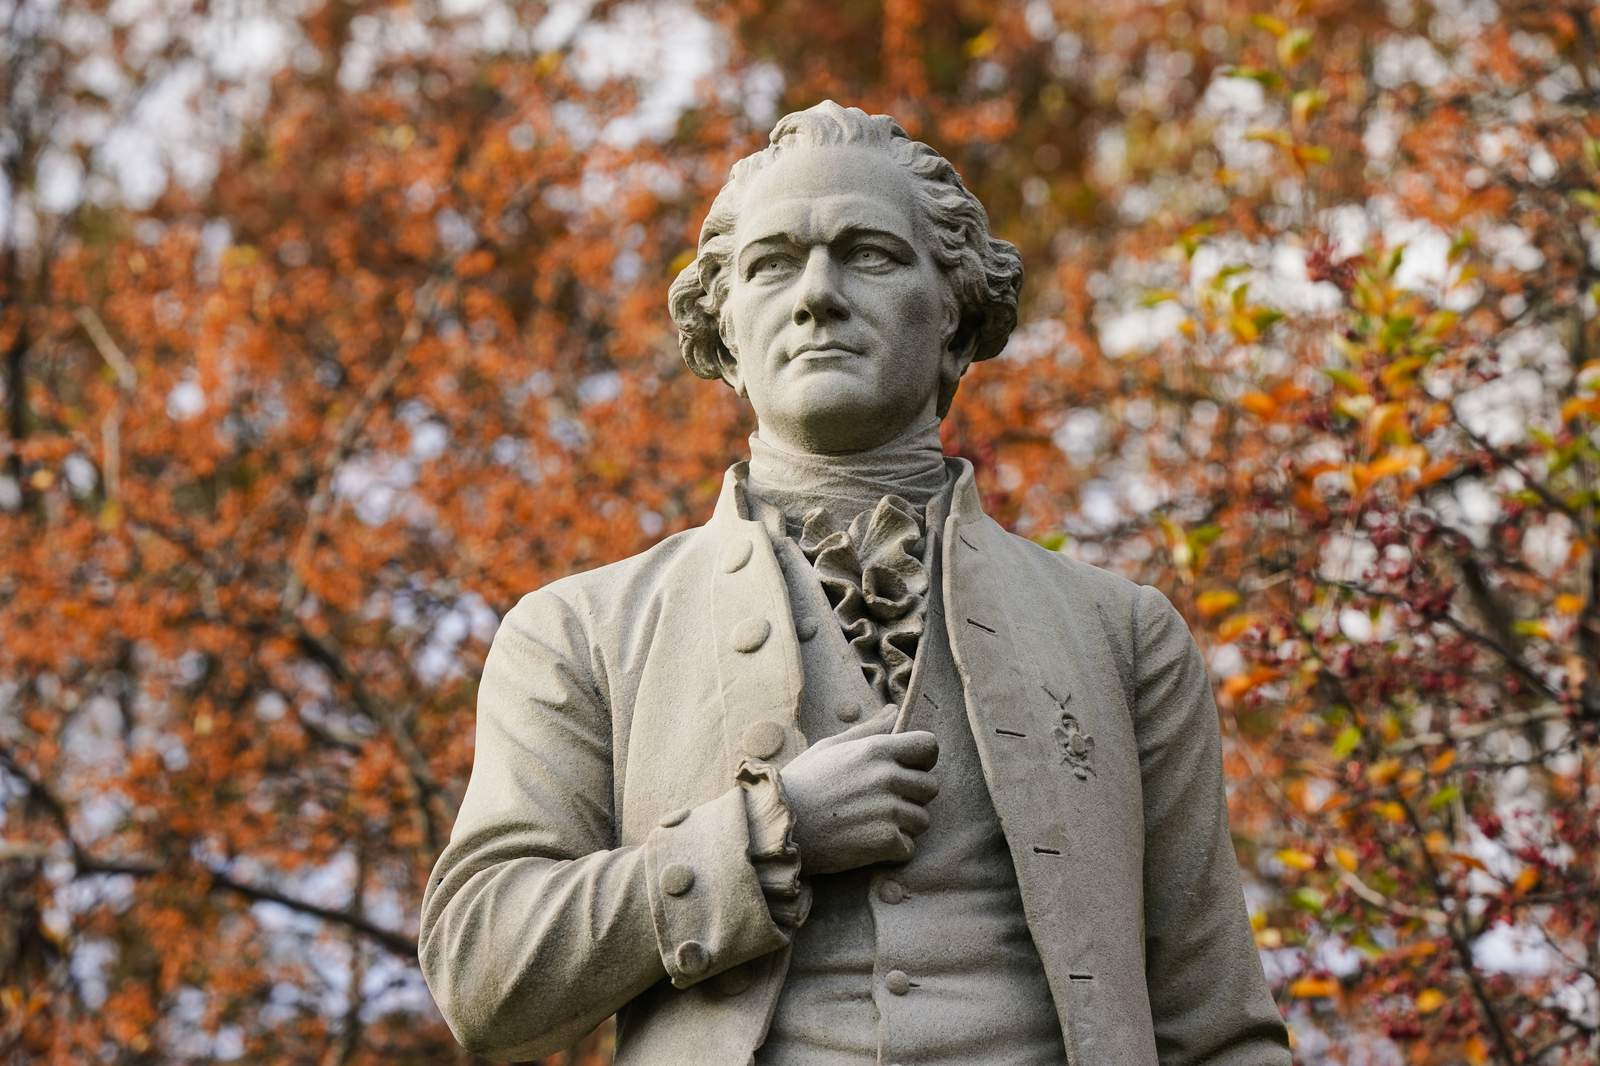 Research sheds light on Alexander Hamilton as slave owner